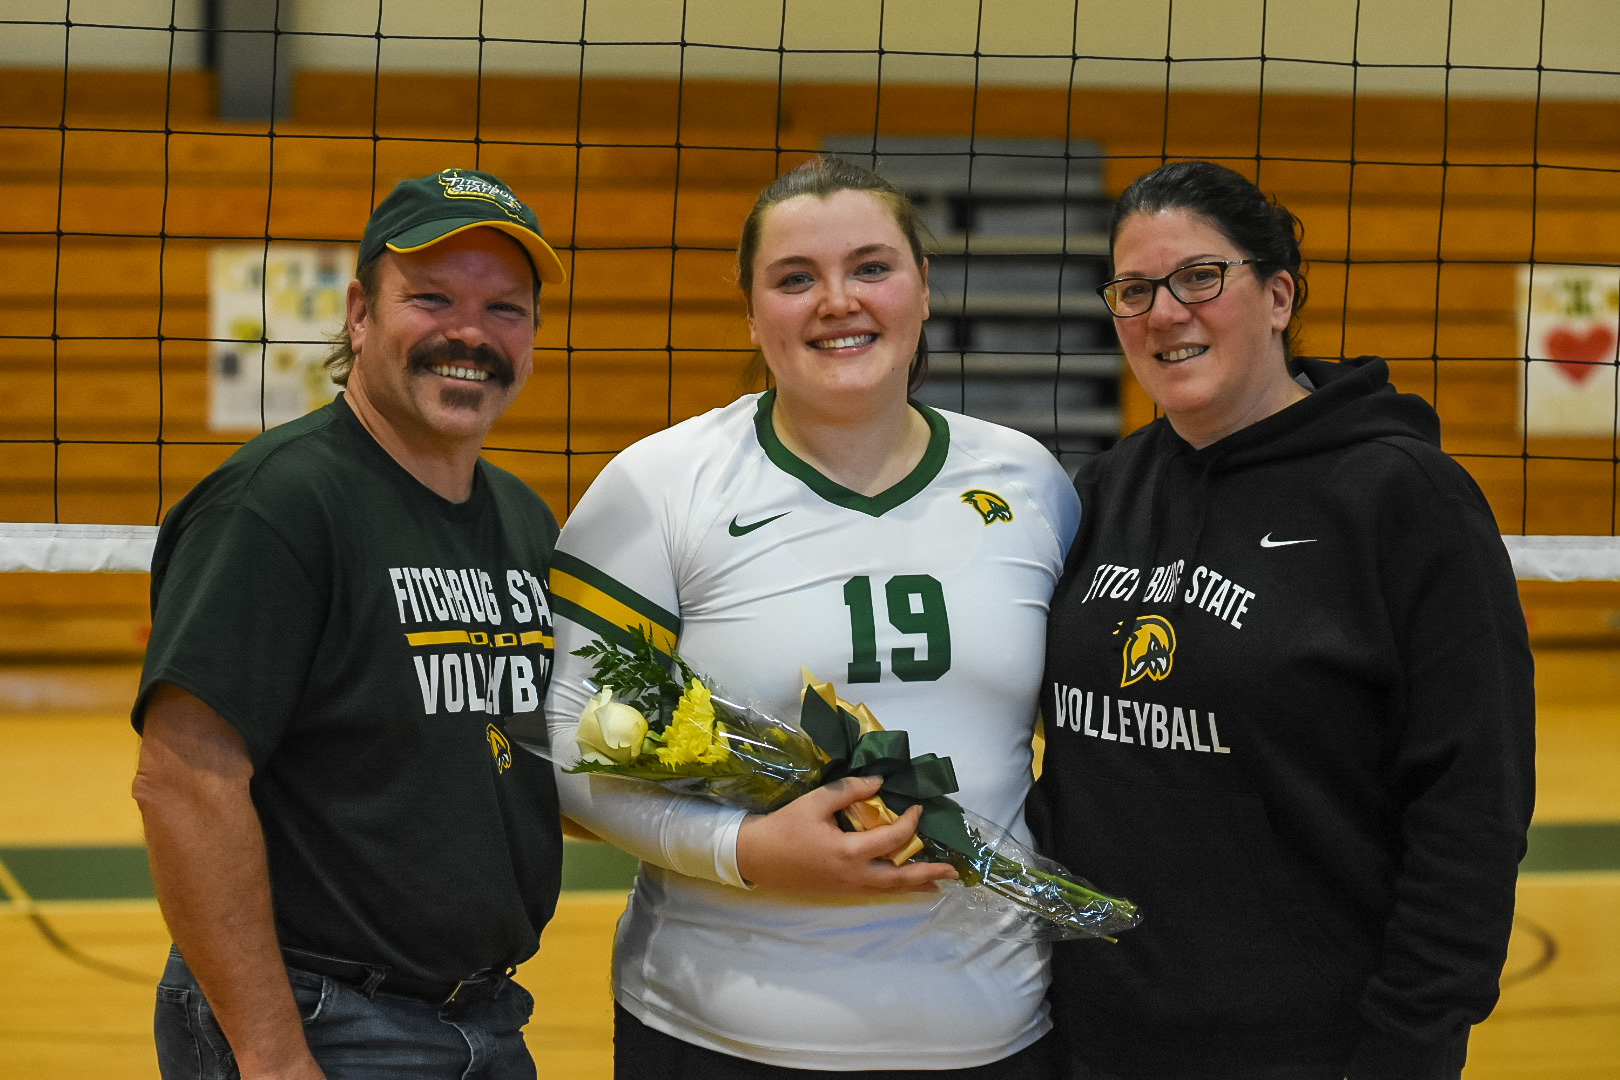 Falcons Notch Five Set Thriller Victory Over Vikings On Senior Day